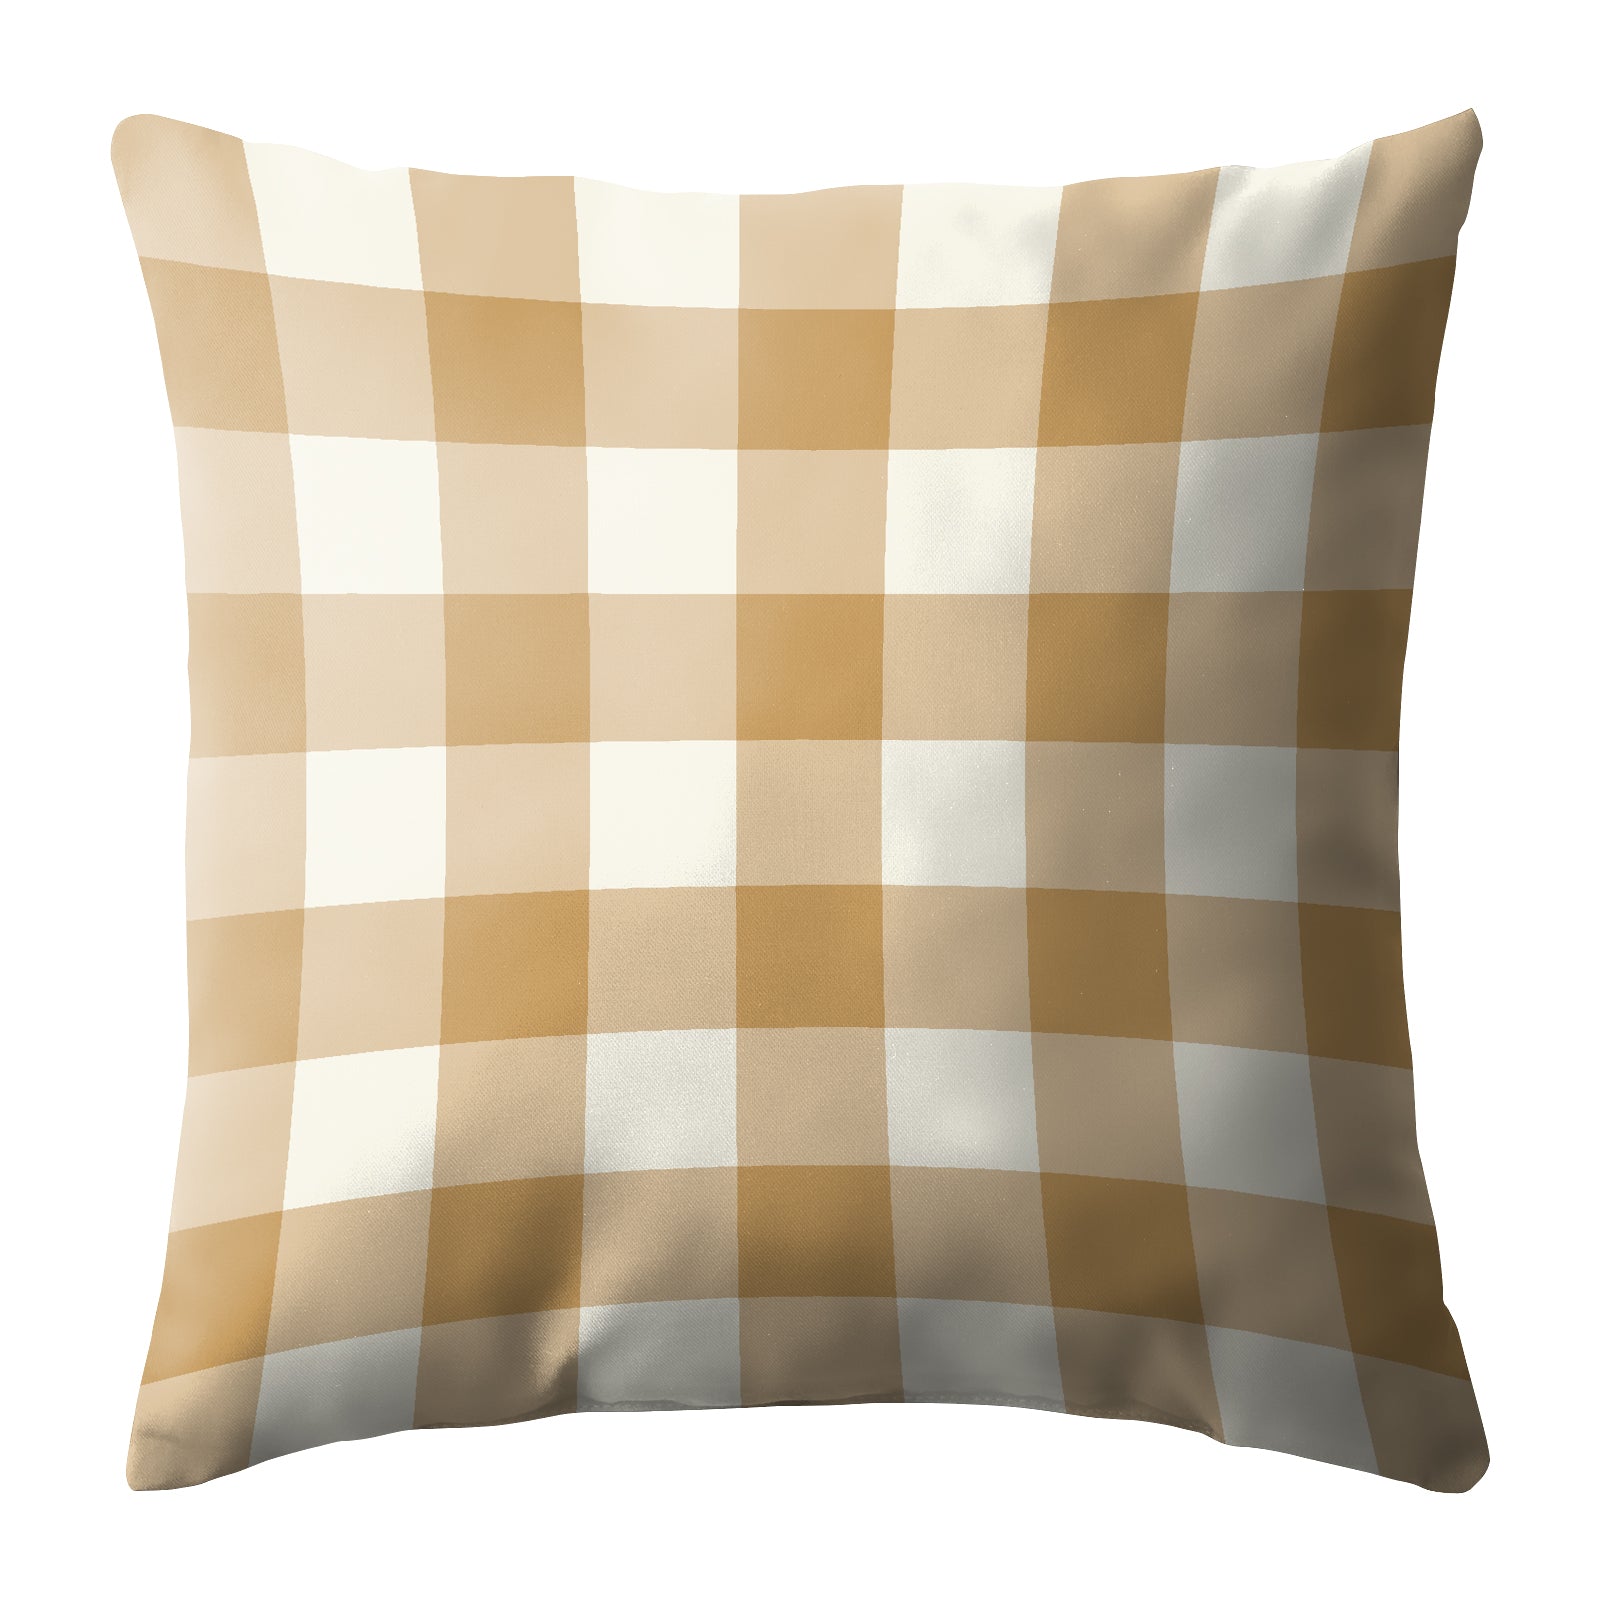 SPRING GALLERY BIG CHECK SAND BROWN (16X16 INCH) DIGITAL PRINTED CUSHION COVER